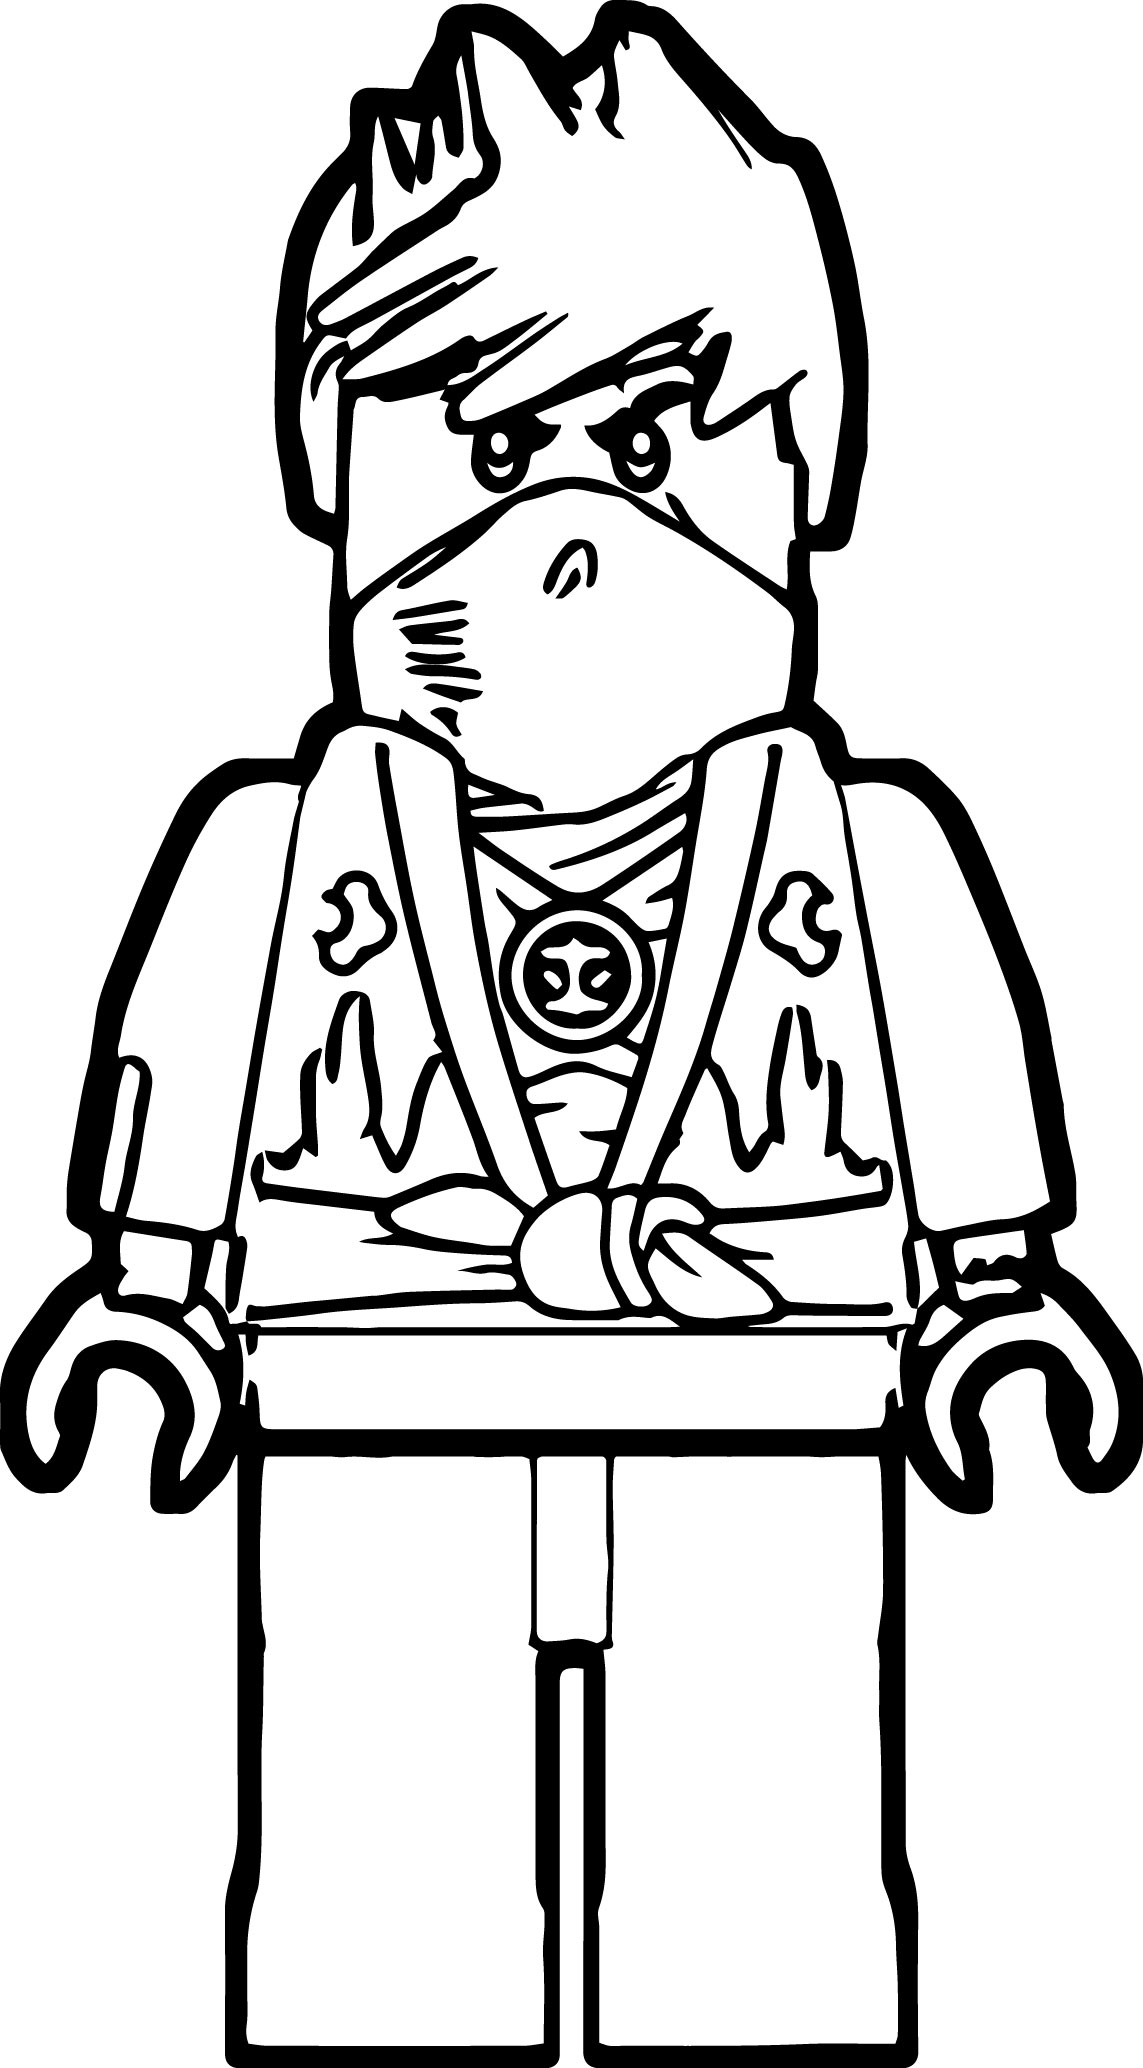 Coloring Pages Of Lego City at GetDrawings Free download